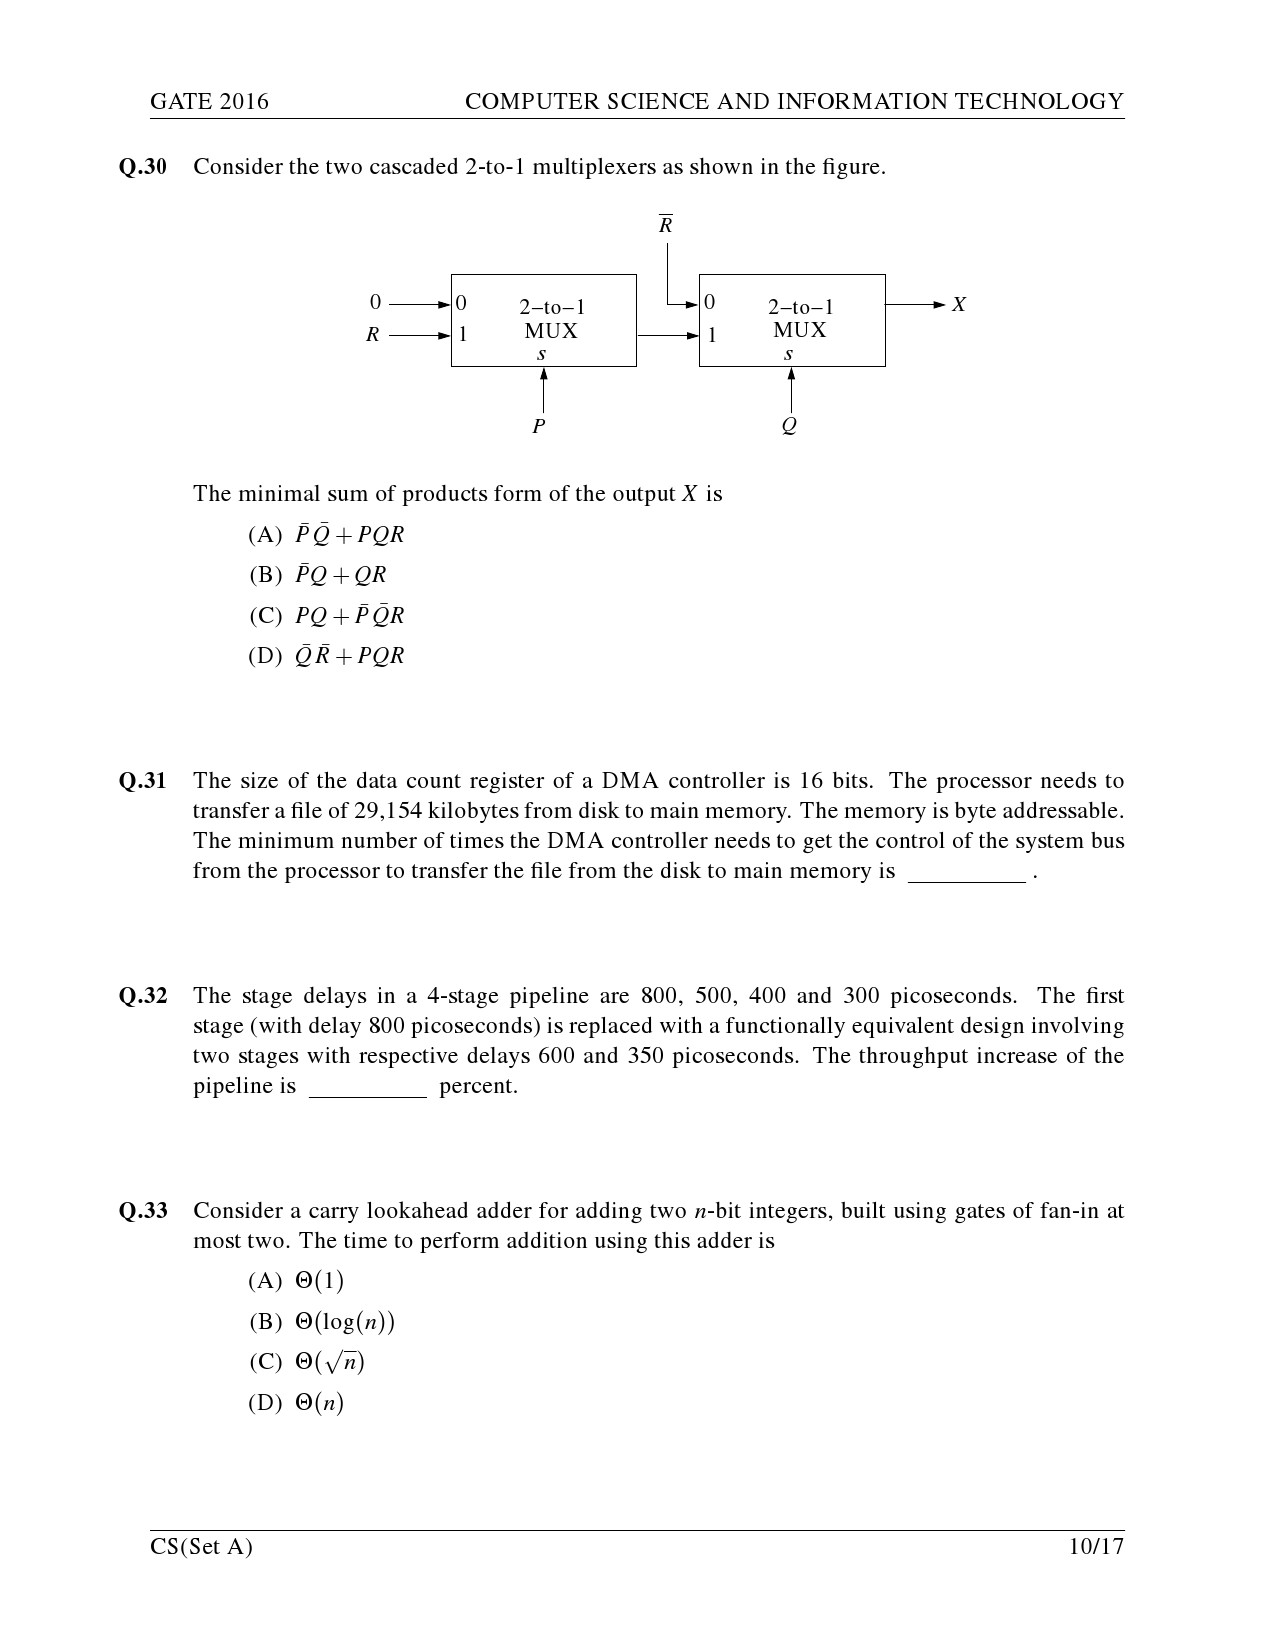 GATE Exam Question Paper 2016 Computer Science and Information Technology Set A 13